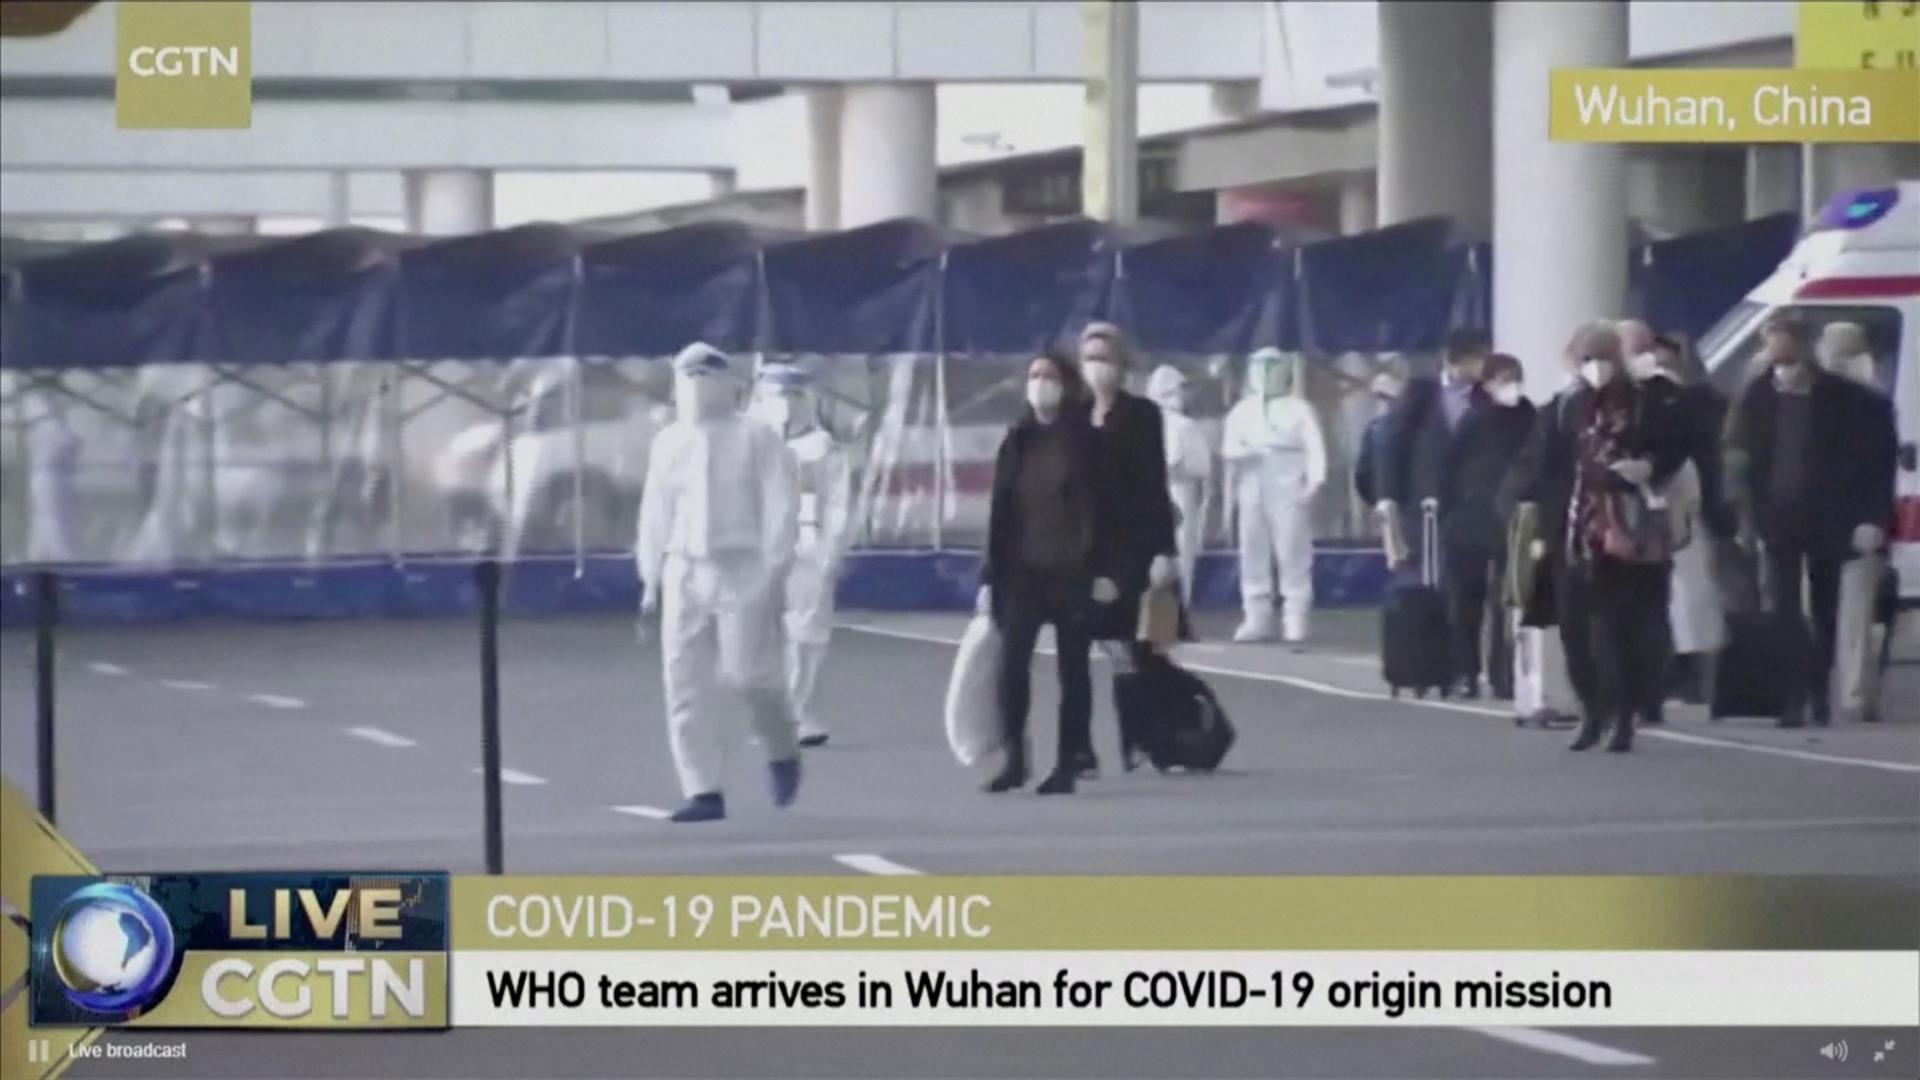 Still image of WHO team tasked with investigating the origins of the coronavirus disease (COVID-19) pandemic arriving at Wuhan Tianhe International Airport Members of the World Health Organisation (WHO) team tasked with investigating the origins of the coronavirus disease (COVID-19) pandemic arrive at Wuhan Tianhe International Airport in Wuhan, Hubei province, China, January 14, 2021, in this still image taken from video provided by CGTN. CGTN/via REUTERS TV  ATTENTION EDITORS - THIS IMAGE HAS BEEN SUPPLIED BY A THIRD PARTY. NO RESALES. NO ARCHIVES. CHINA OUT. CGTN